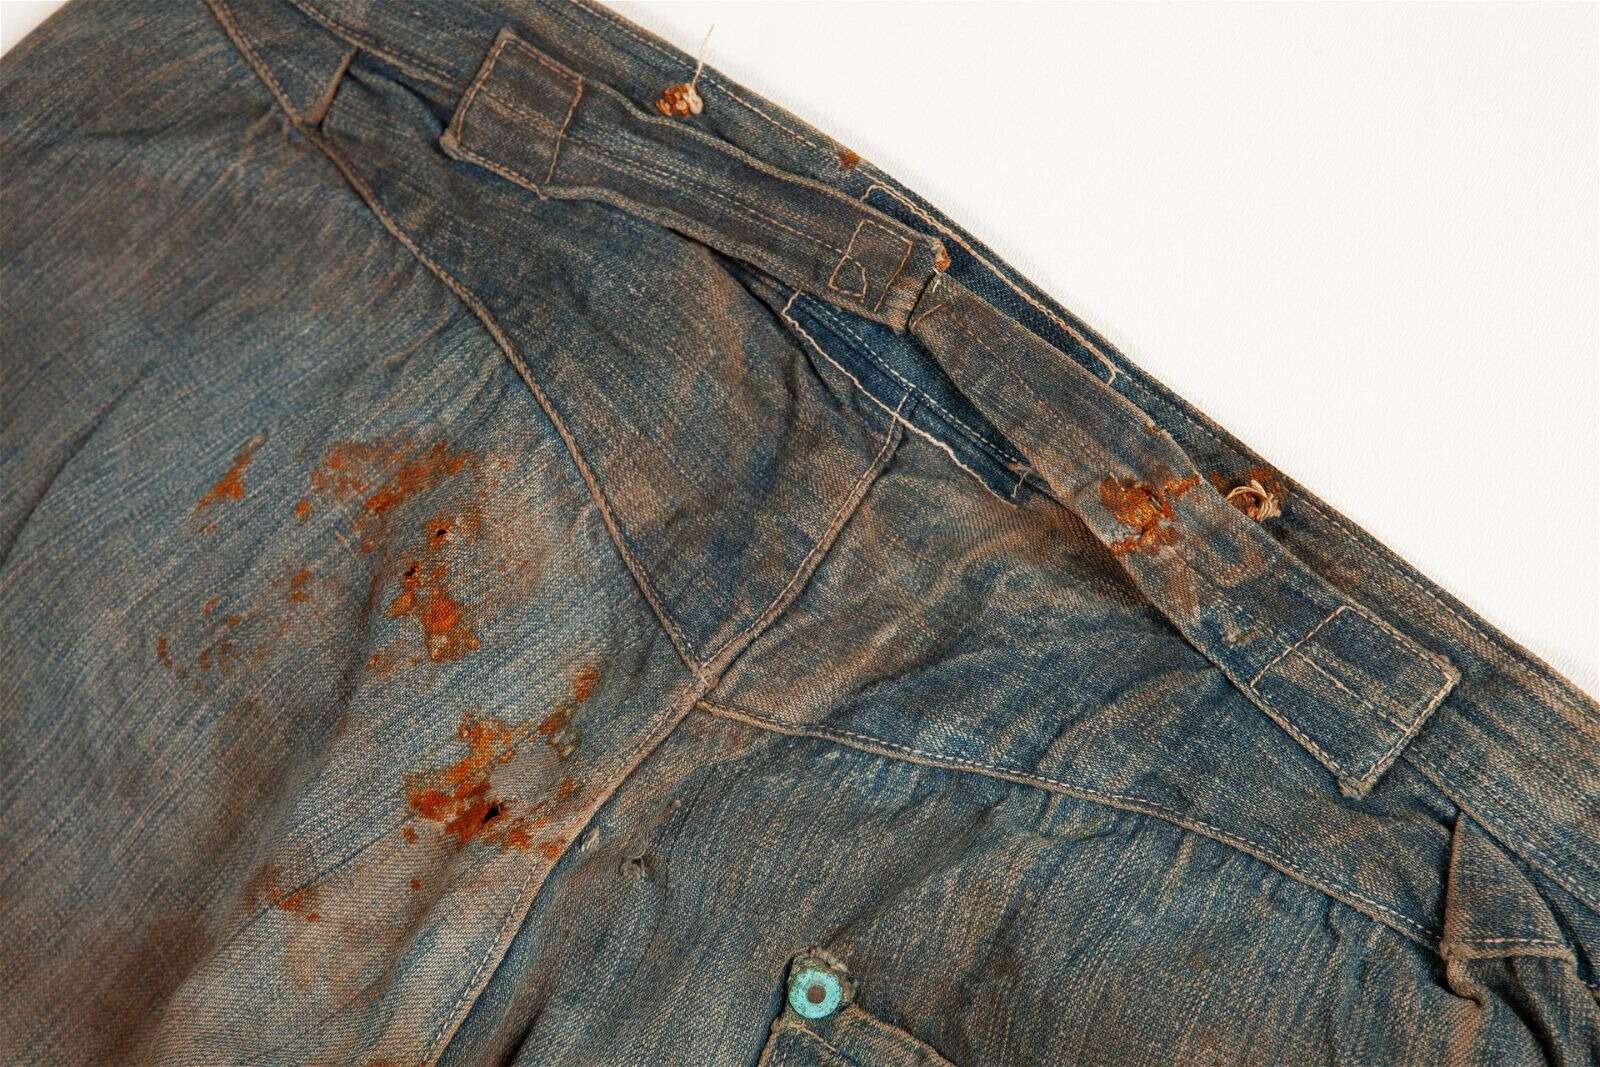 So-called ‘oldest’ pair of denim jeans sell for $100,000 at auction ...